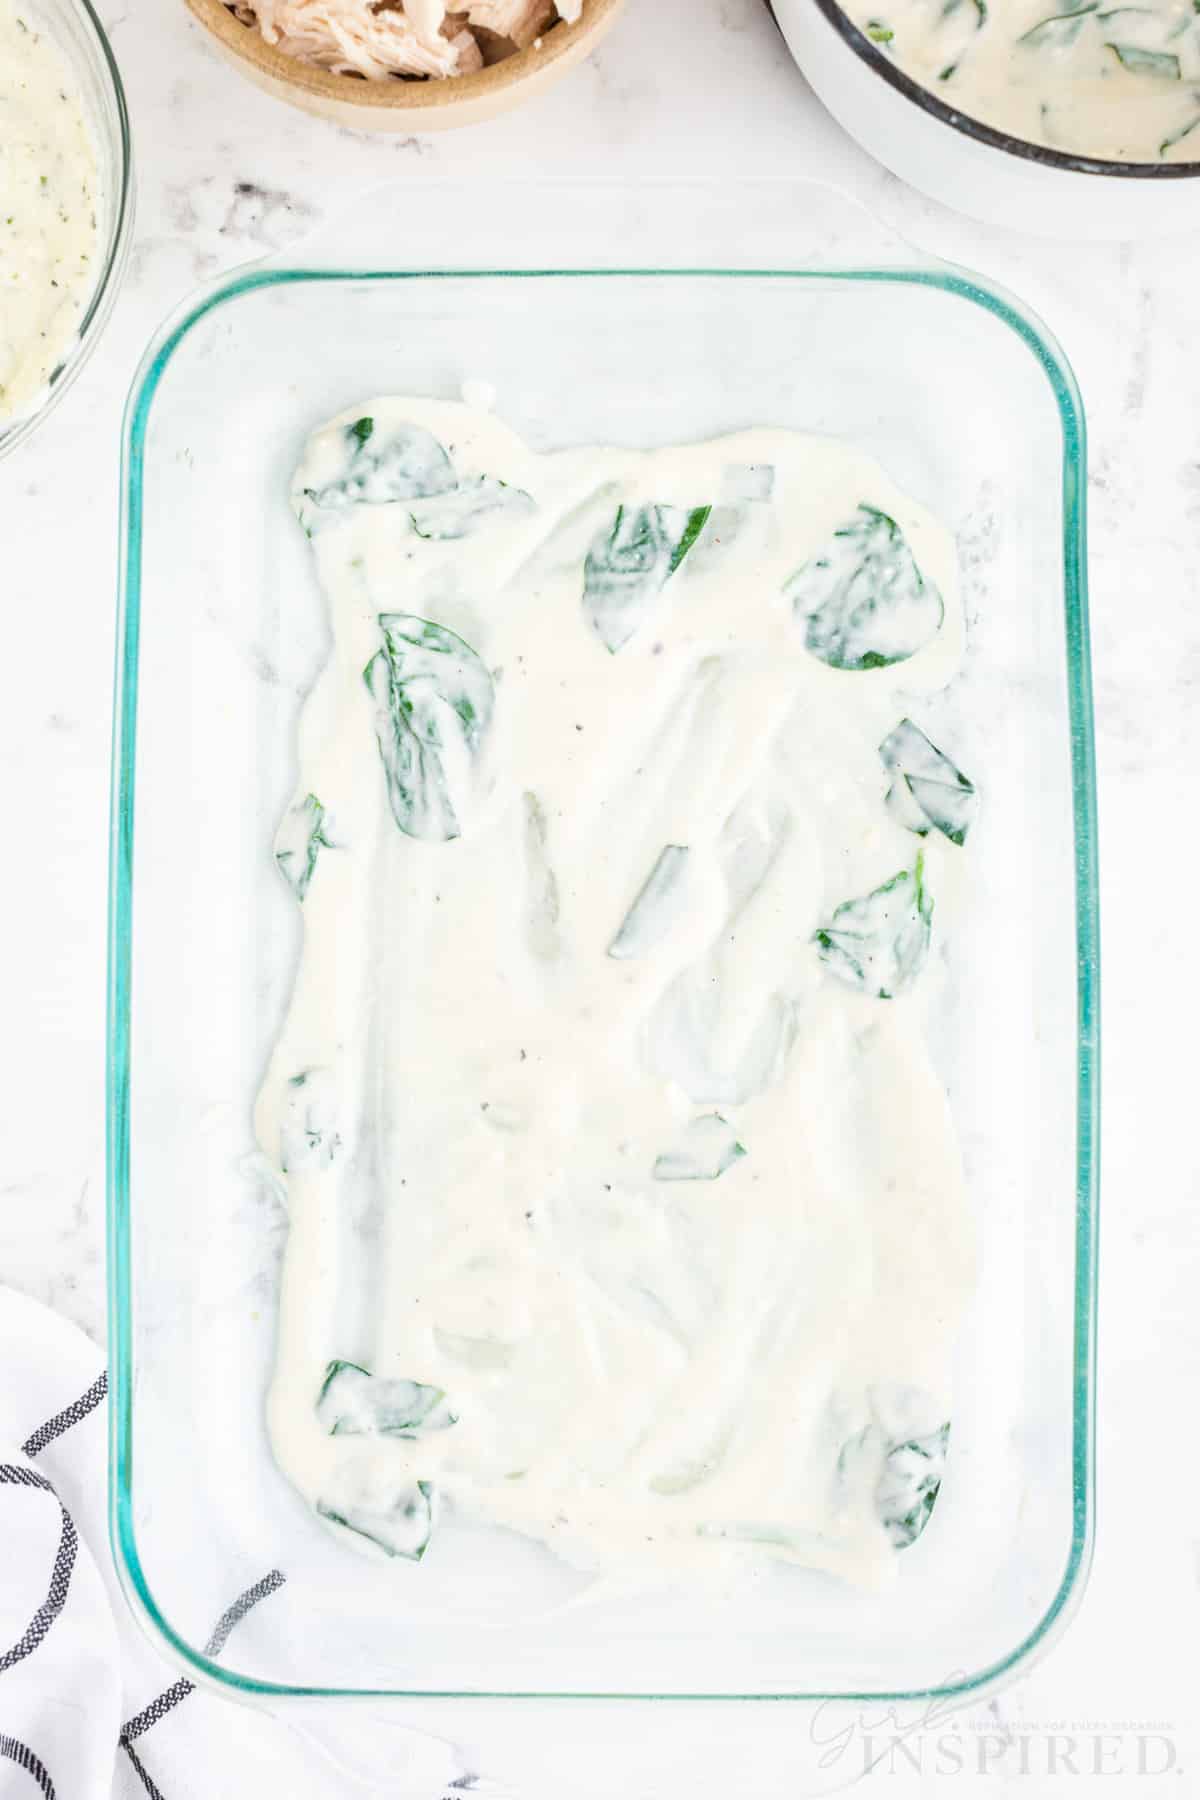 Layer of white lasagna sauce spread out in glass casserole dish, checkered linen, on a marble countertop.